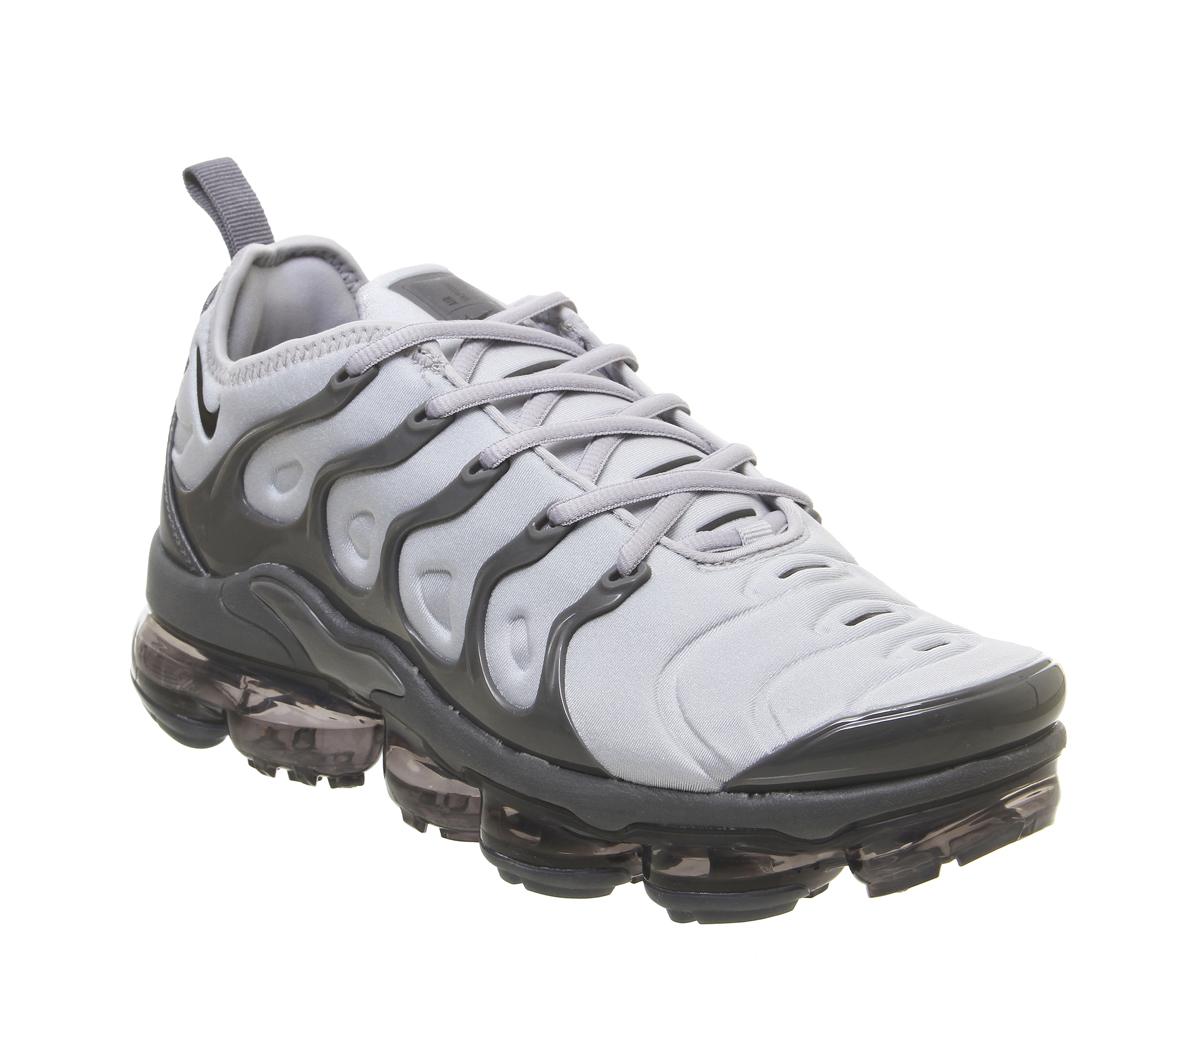 Nike Air Vapormax Plus Trainers Wolf Grey Black Grey - Men's Trainers